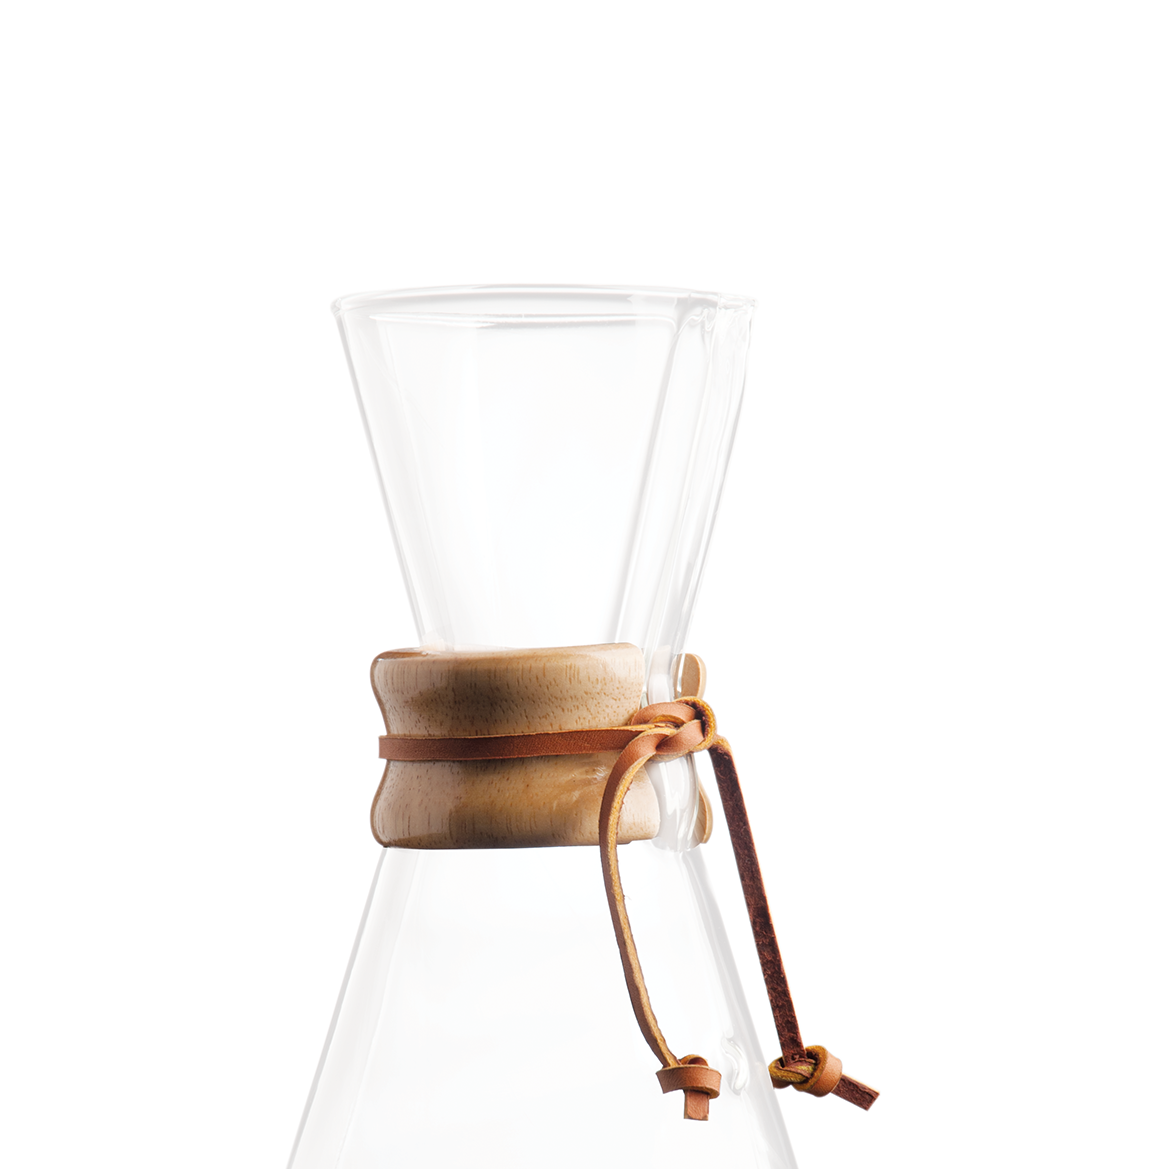 Wood Collar and Tie for 3 Cup Chemex